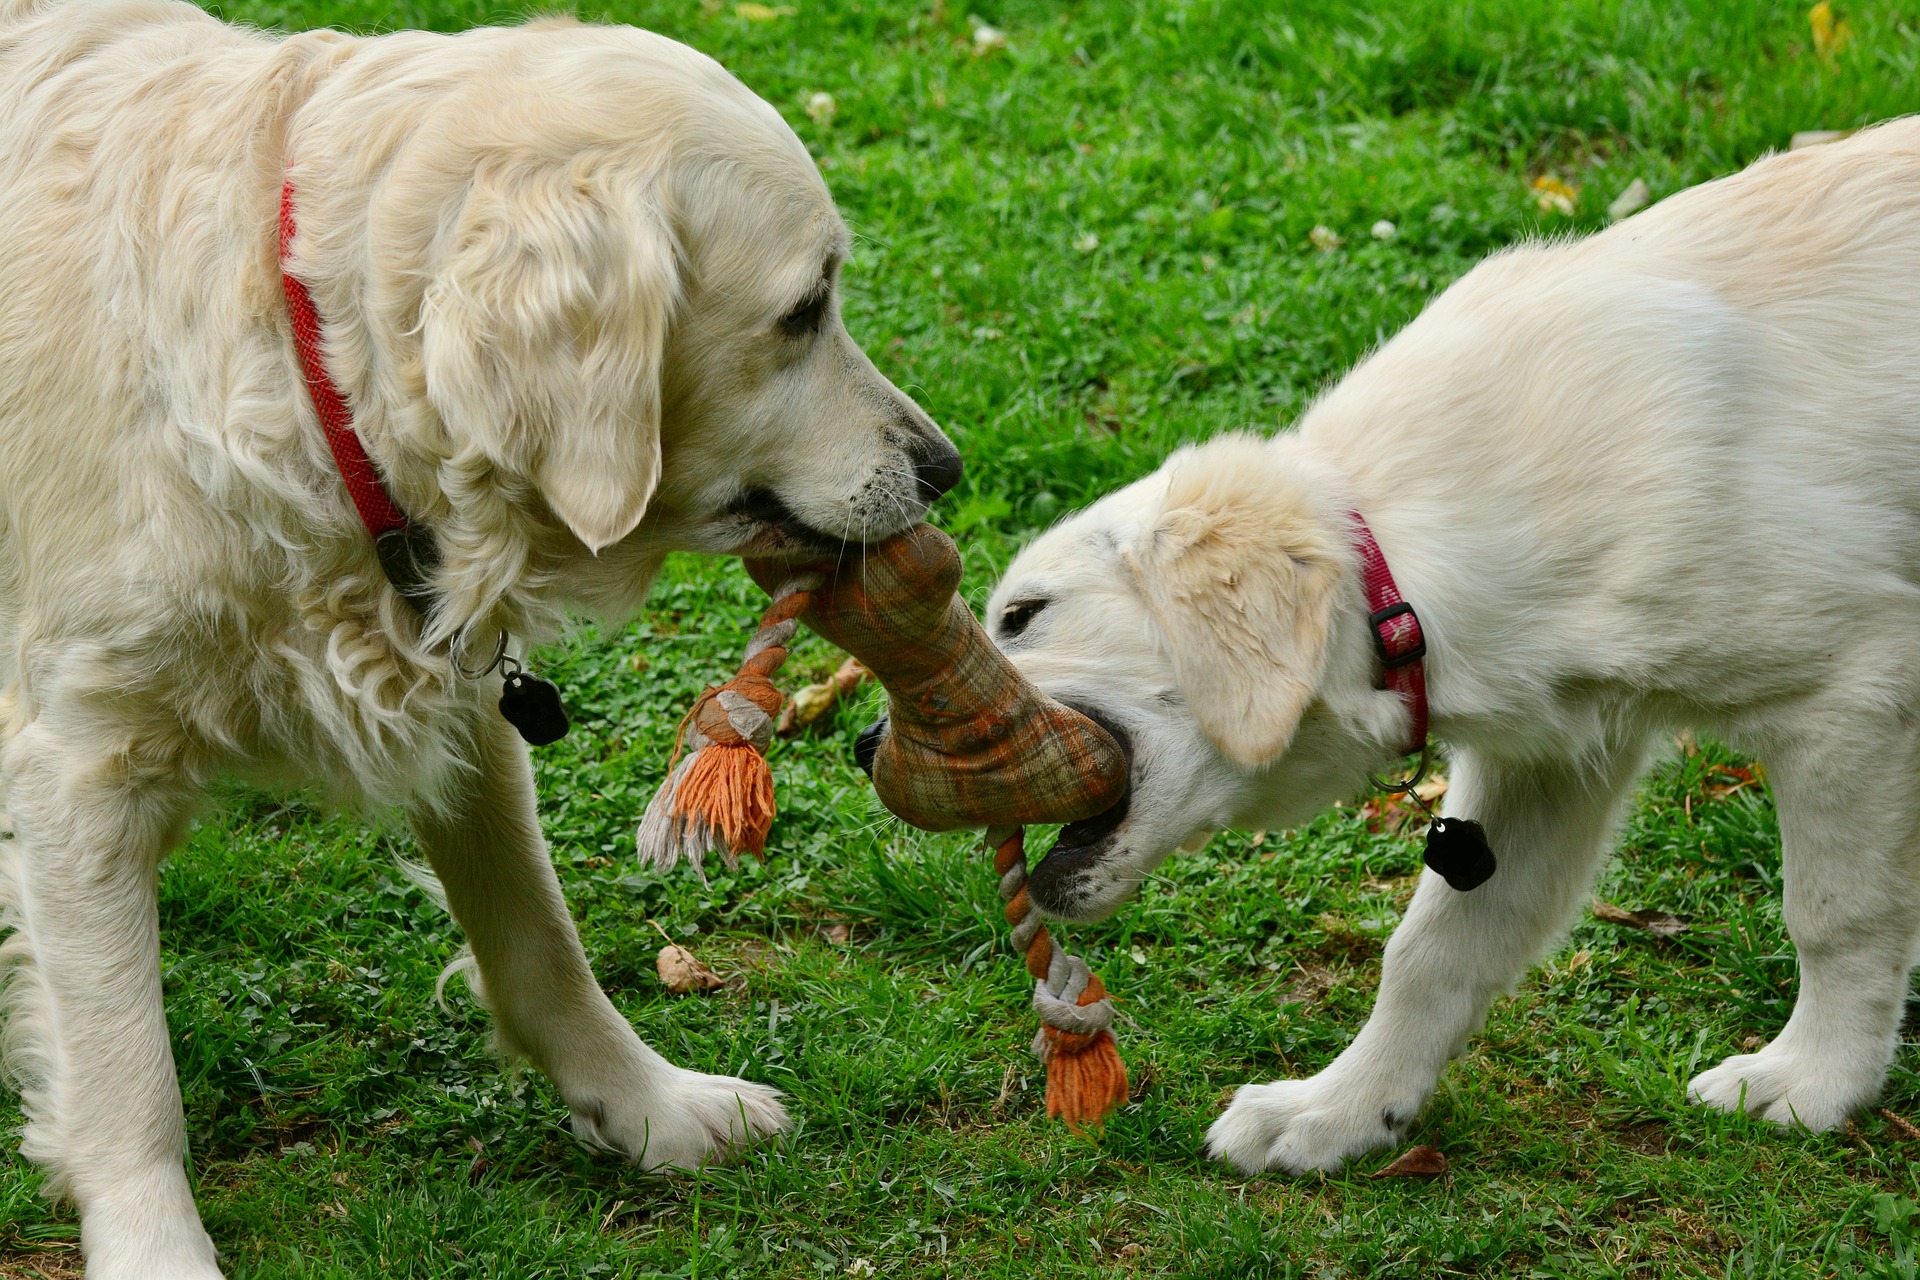 Puppy with older dog playing